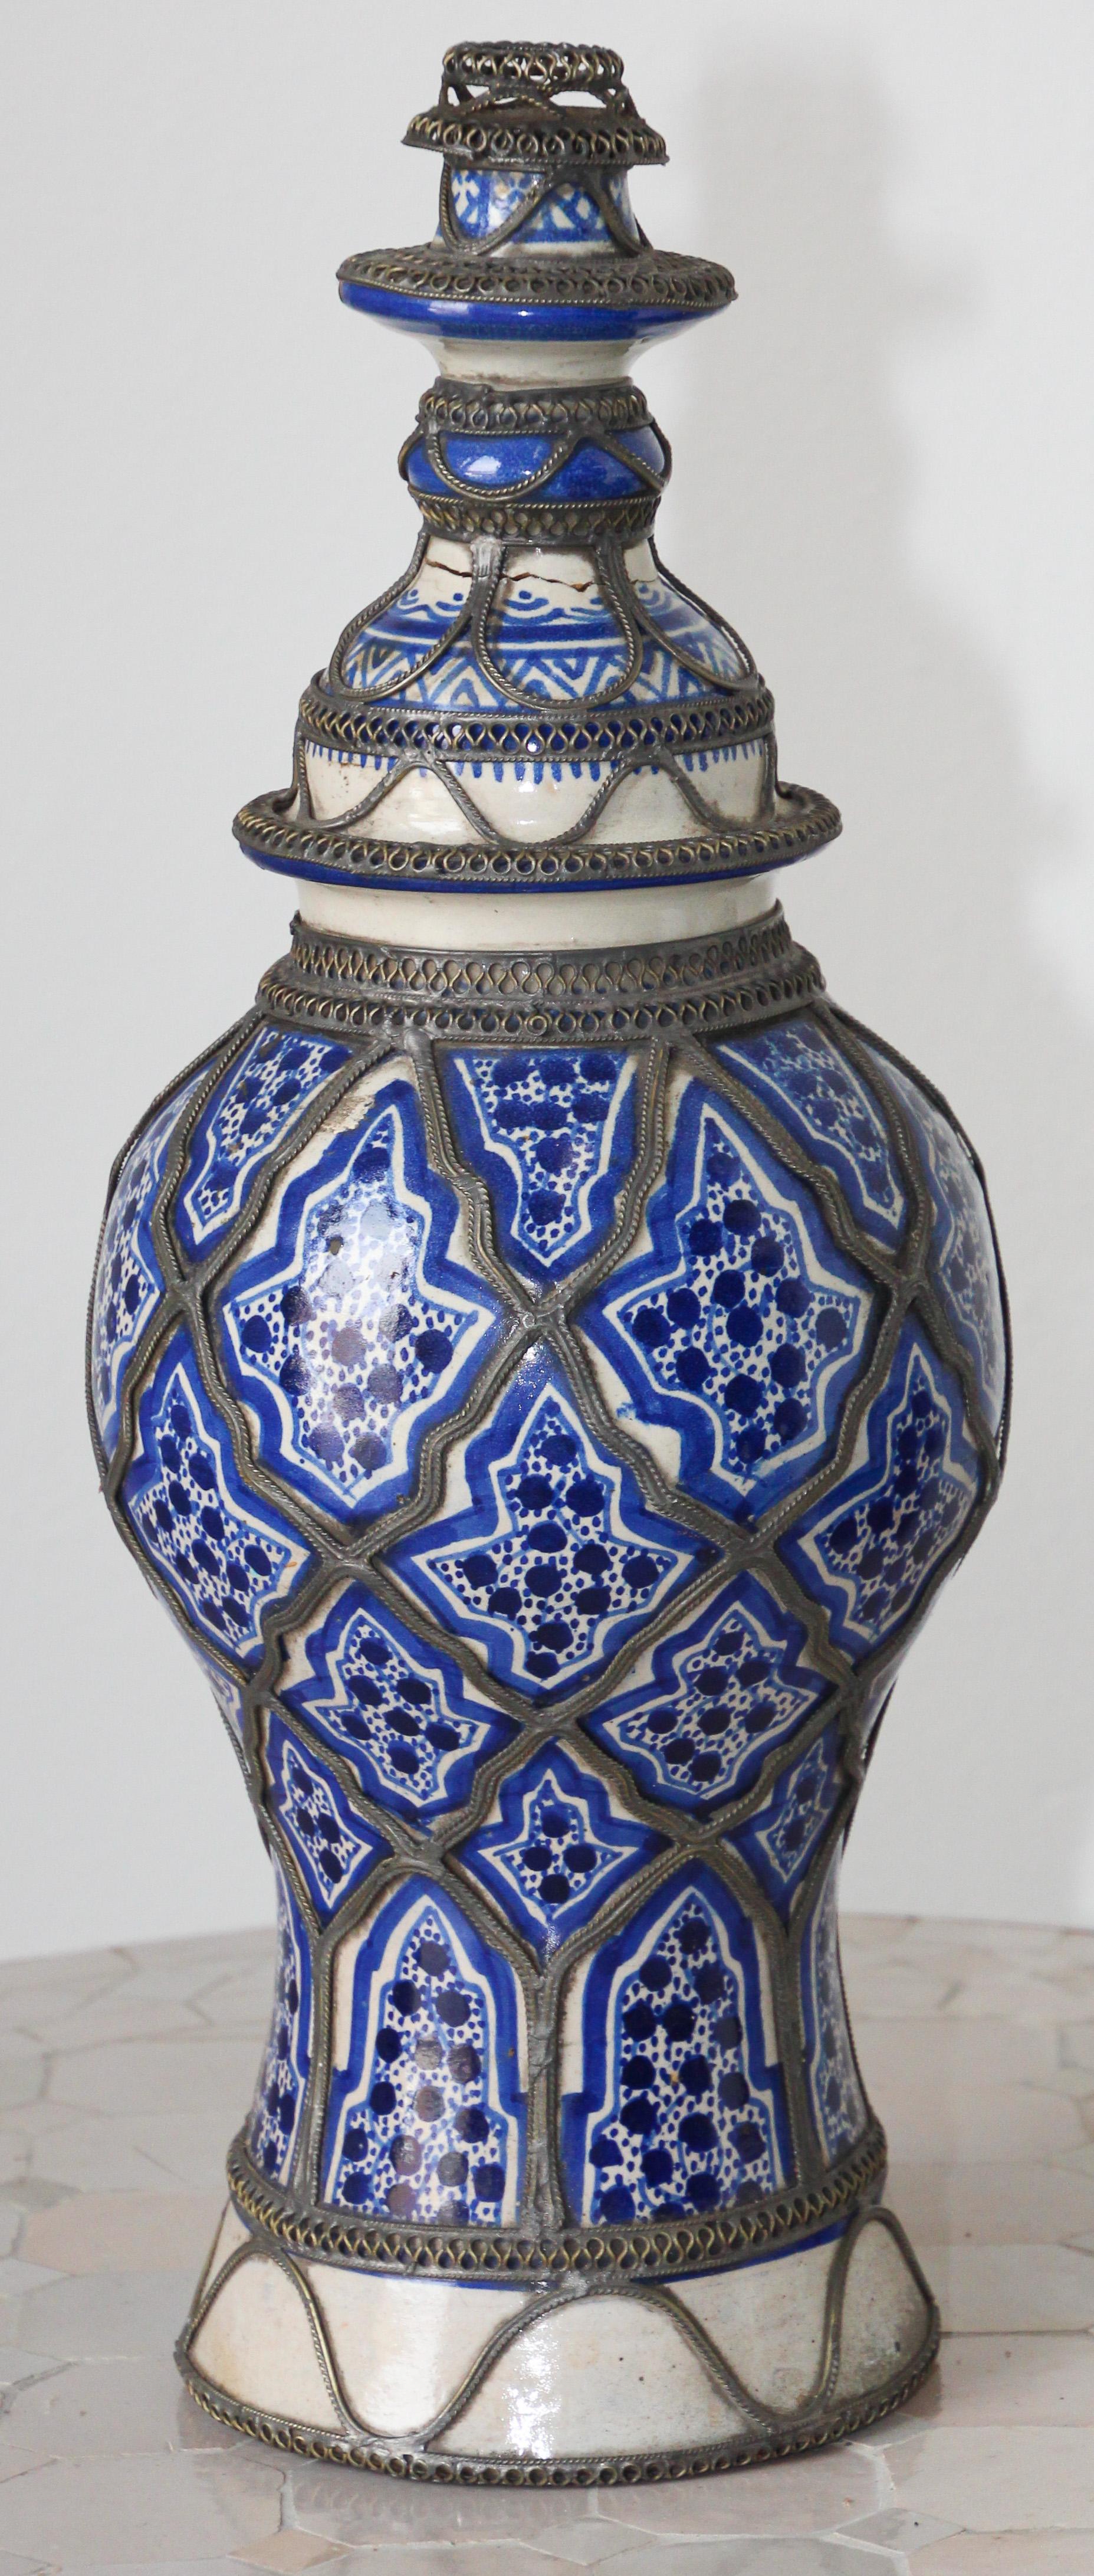 Fabulous handcrafted antique Moroccan blue and white ceramic candle holder in Moorish style.
 Adorned with fine filigree silver nickel work.
Candlestick with white and blue color of the ceramic is renowned as bleu de Fez.
Handcrafted in Fez,